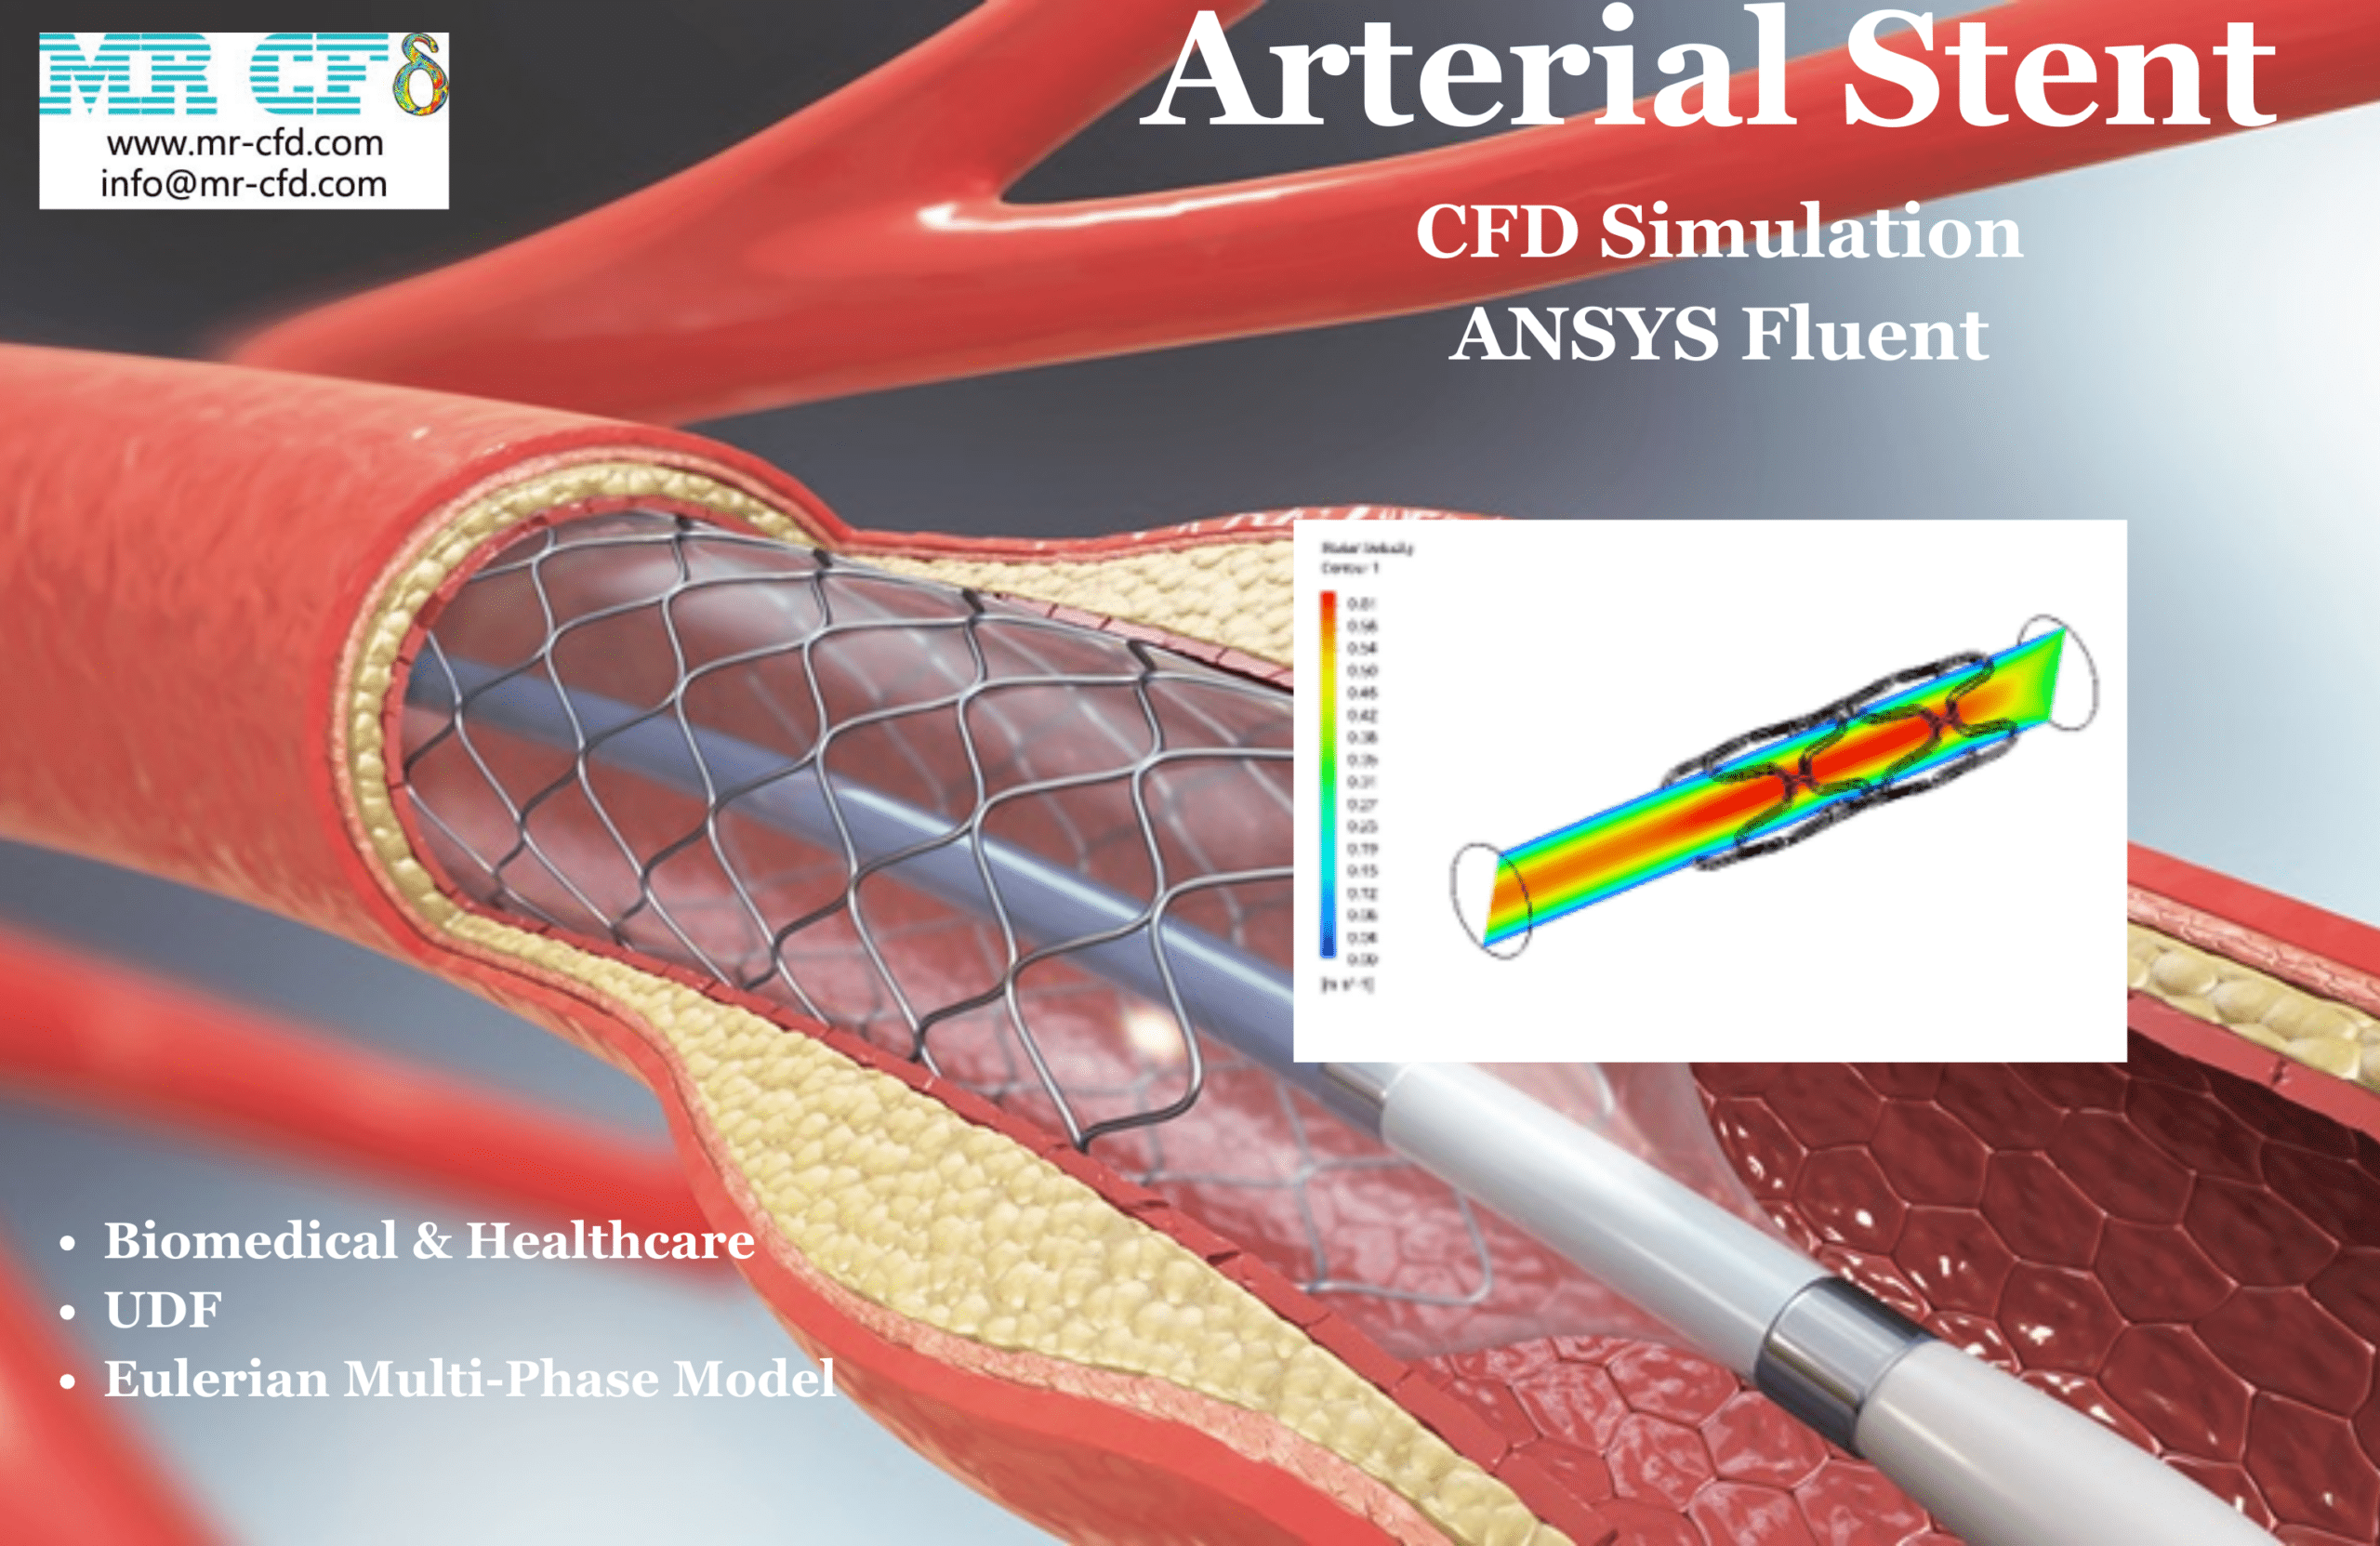 Arterial Stent CFD Simulation, ANSYS Fluent